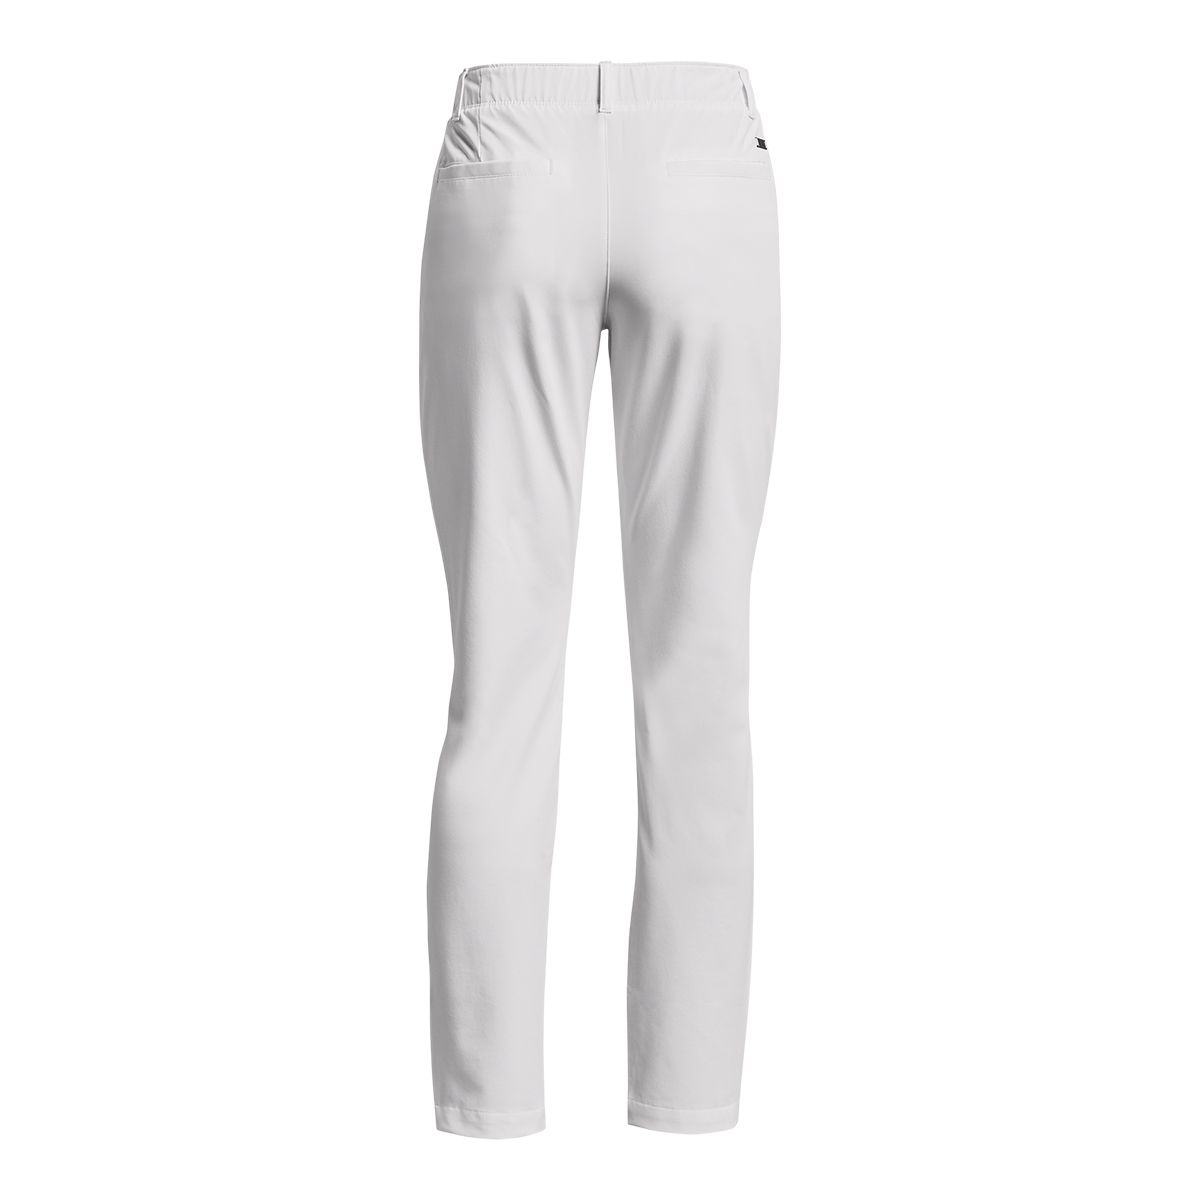 Under Armour Links Pants